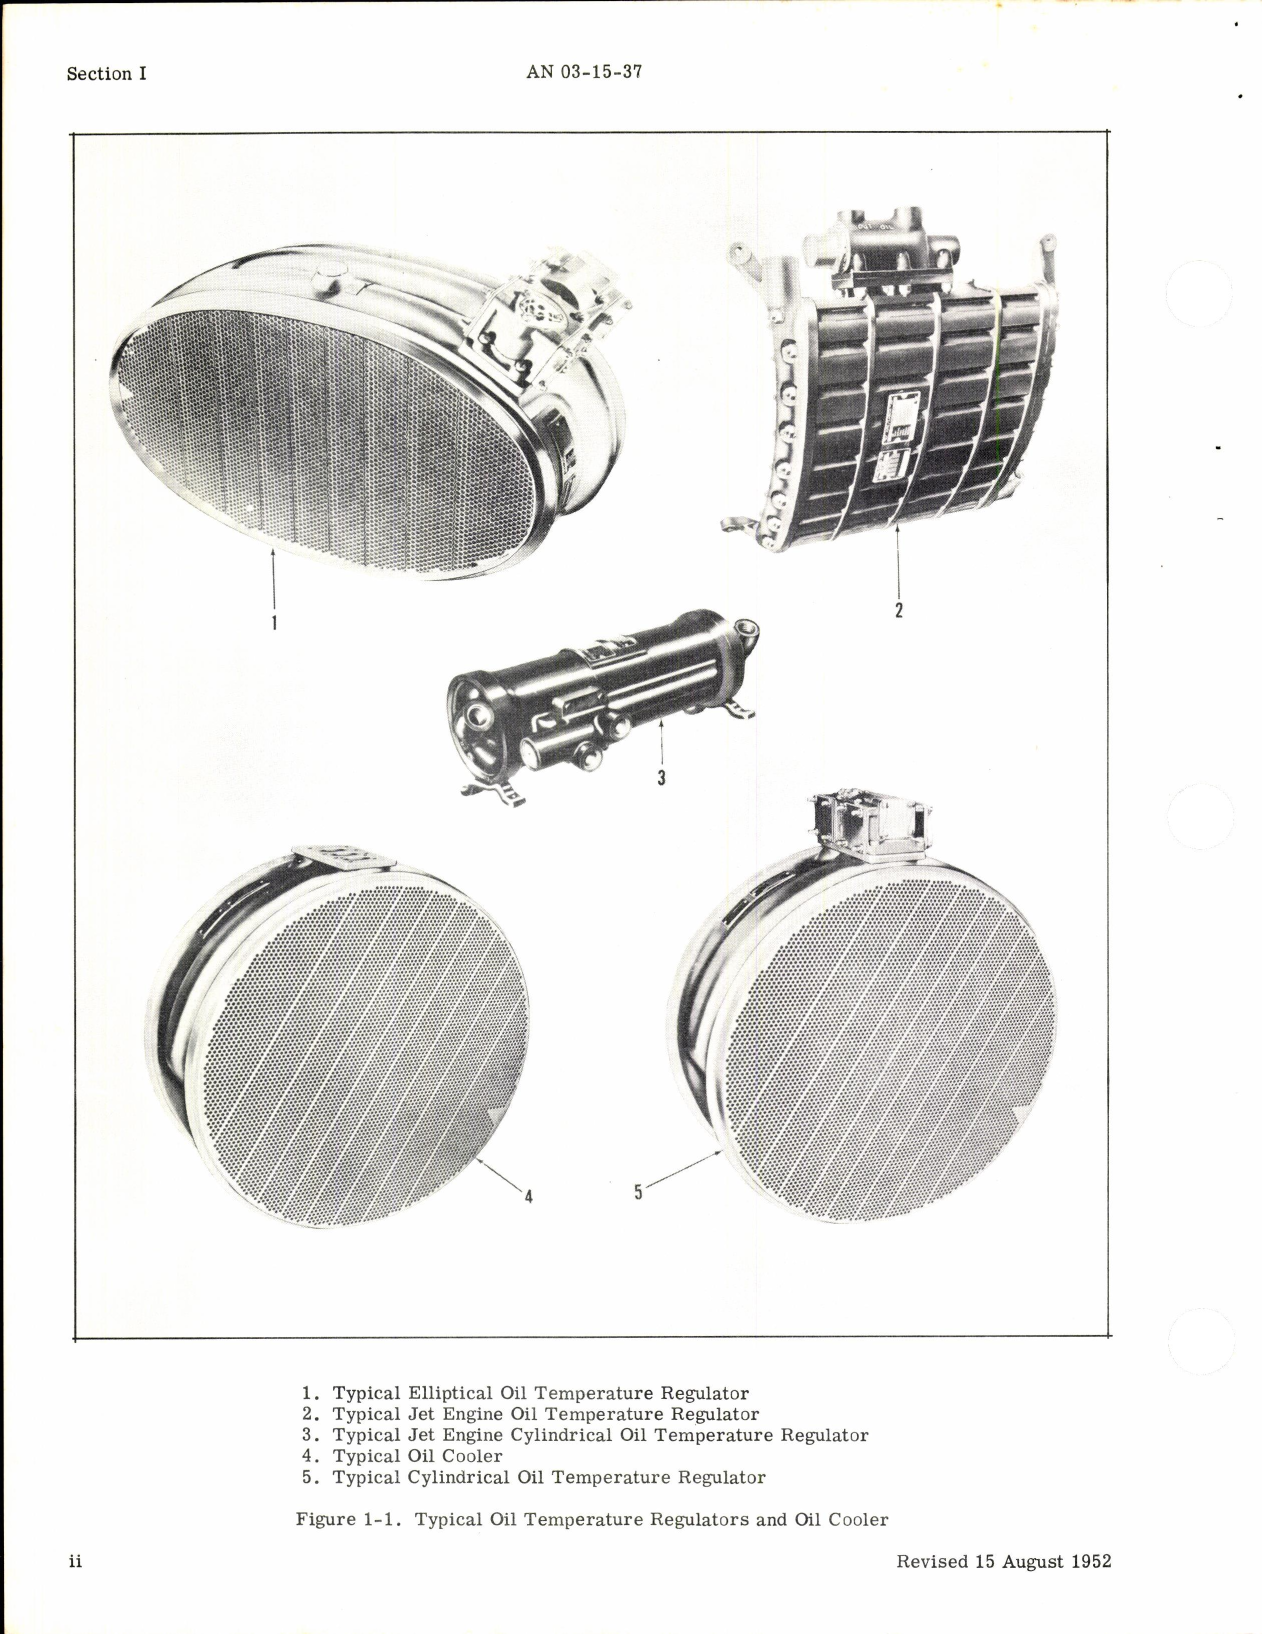 Sample page 4 from AirCorps Library document: Overhaul Instructions for Airesearch Oil Temperature Regulators Oil Coolers and Valves 